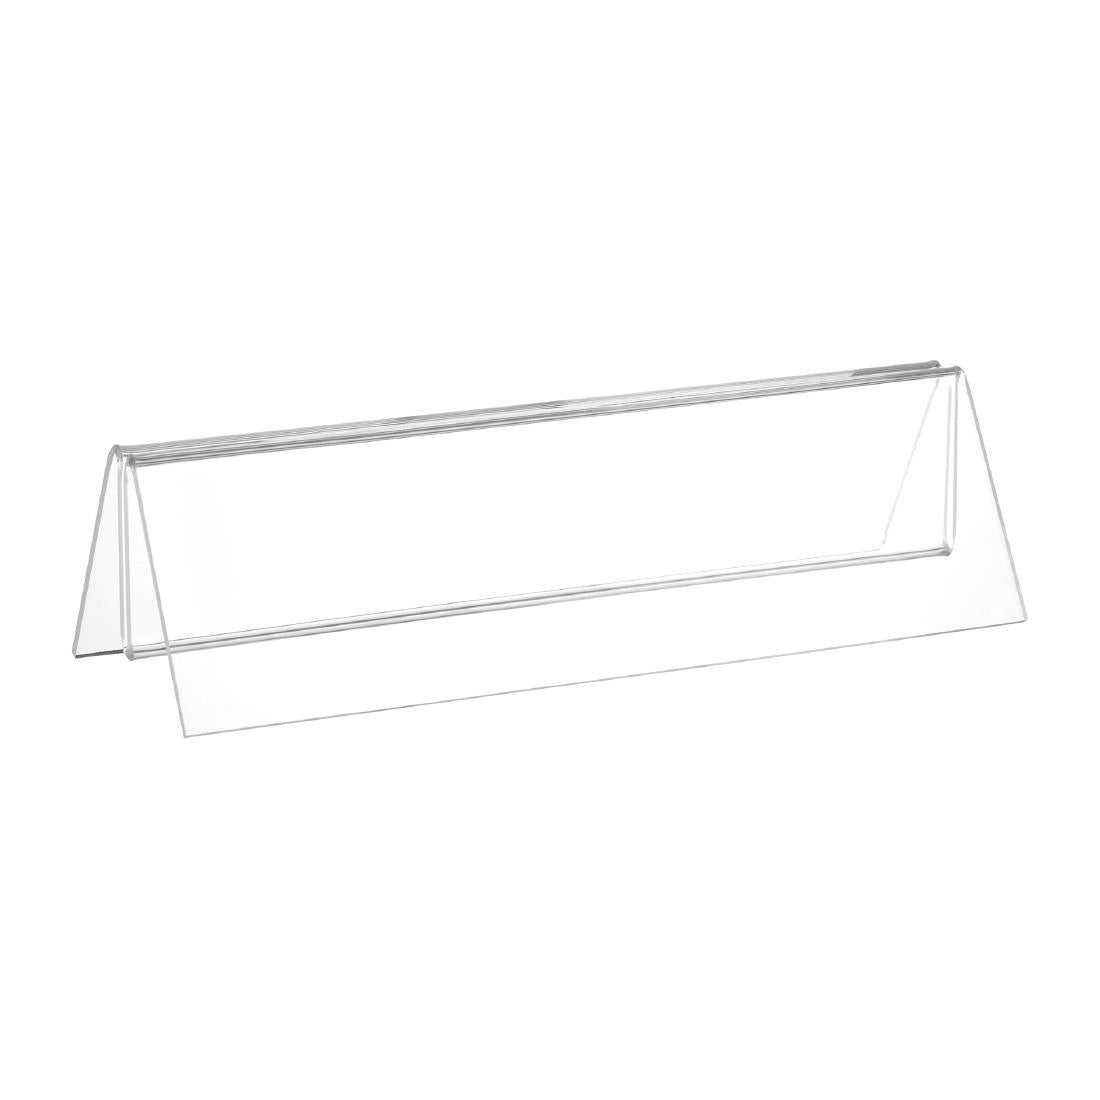 D790 Olympia Wide Base Acrylic Menu Holder JD Catering Equipment Solutions Ltd